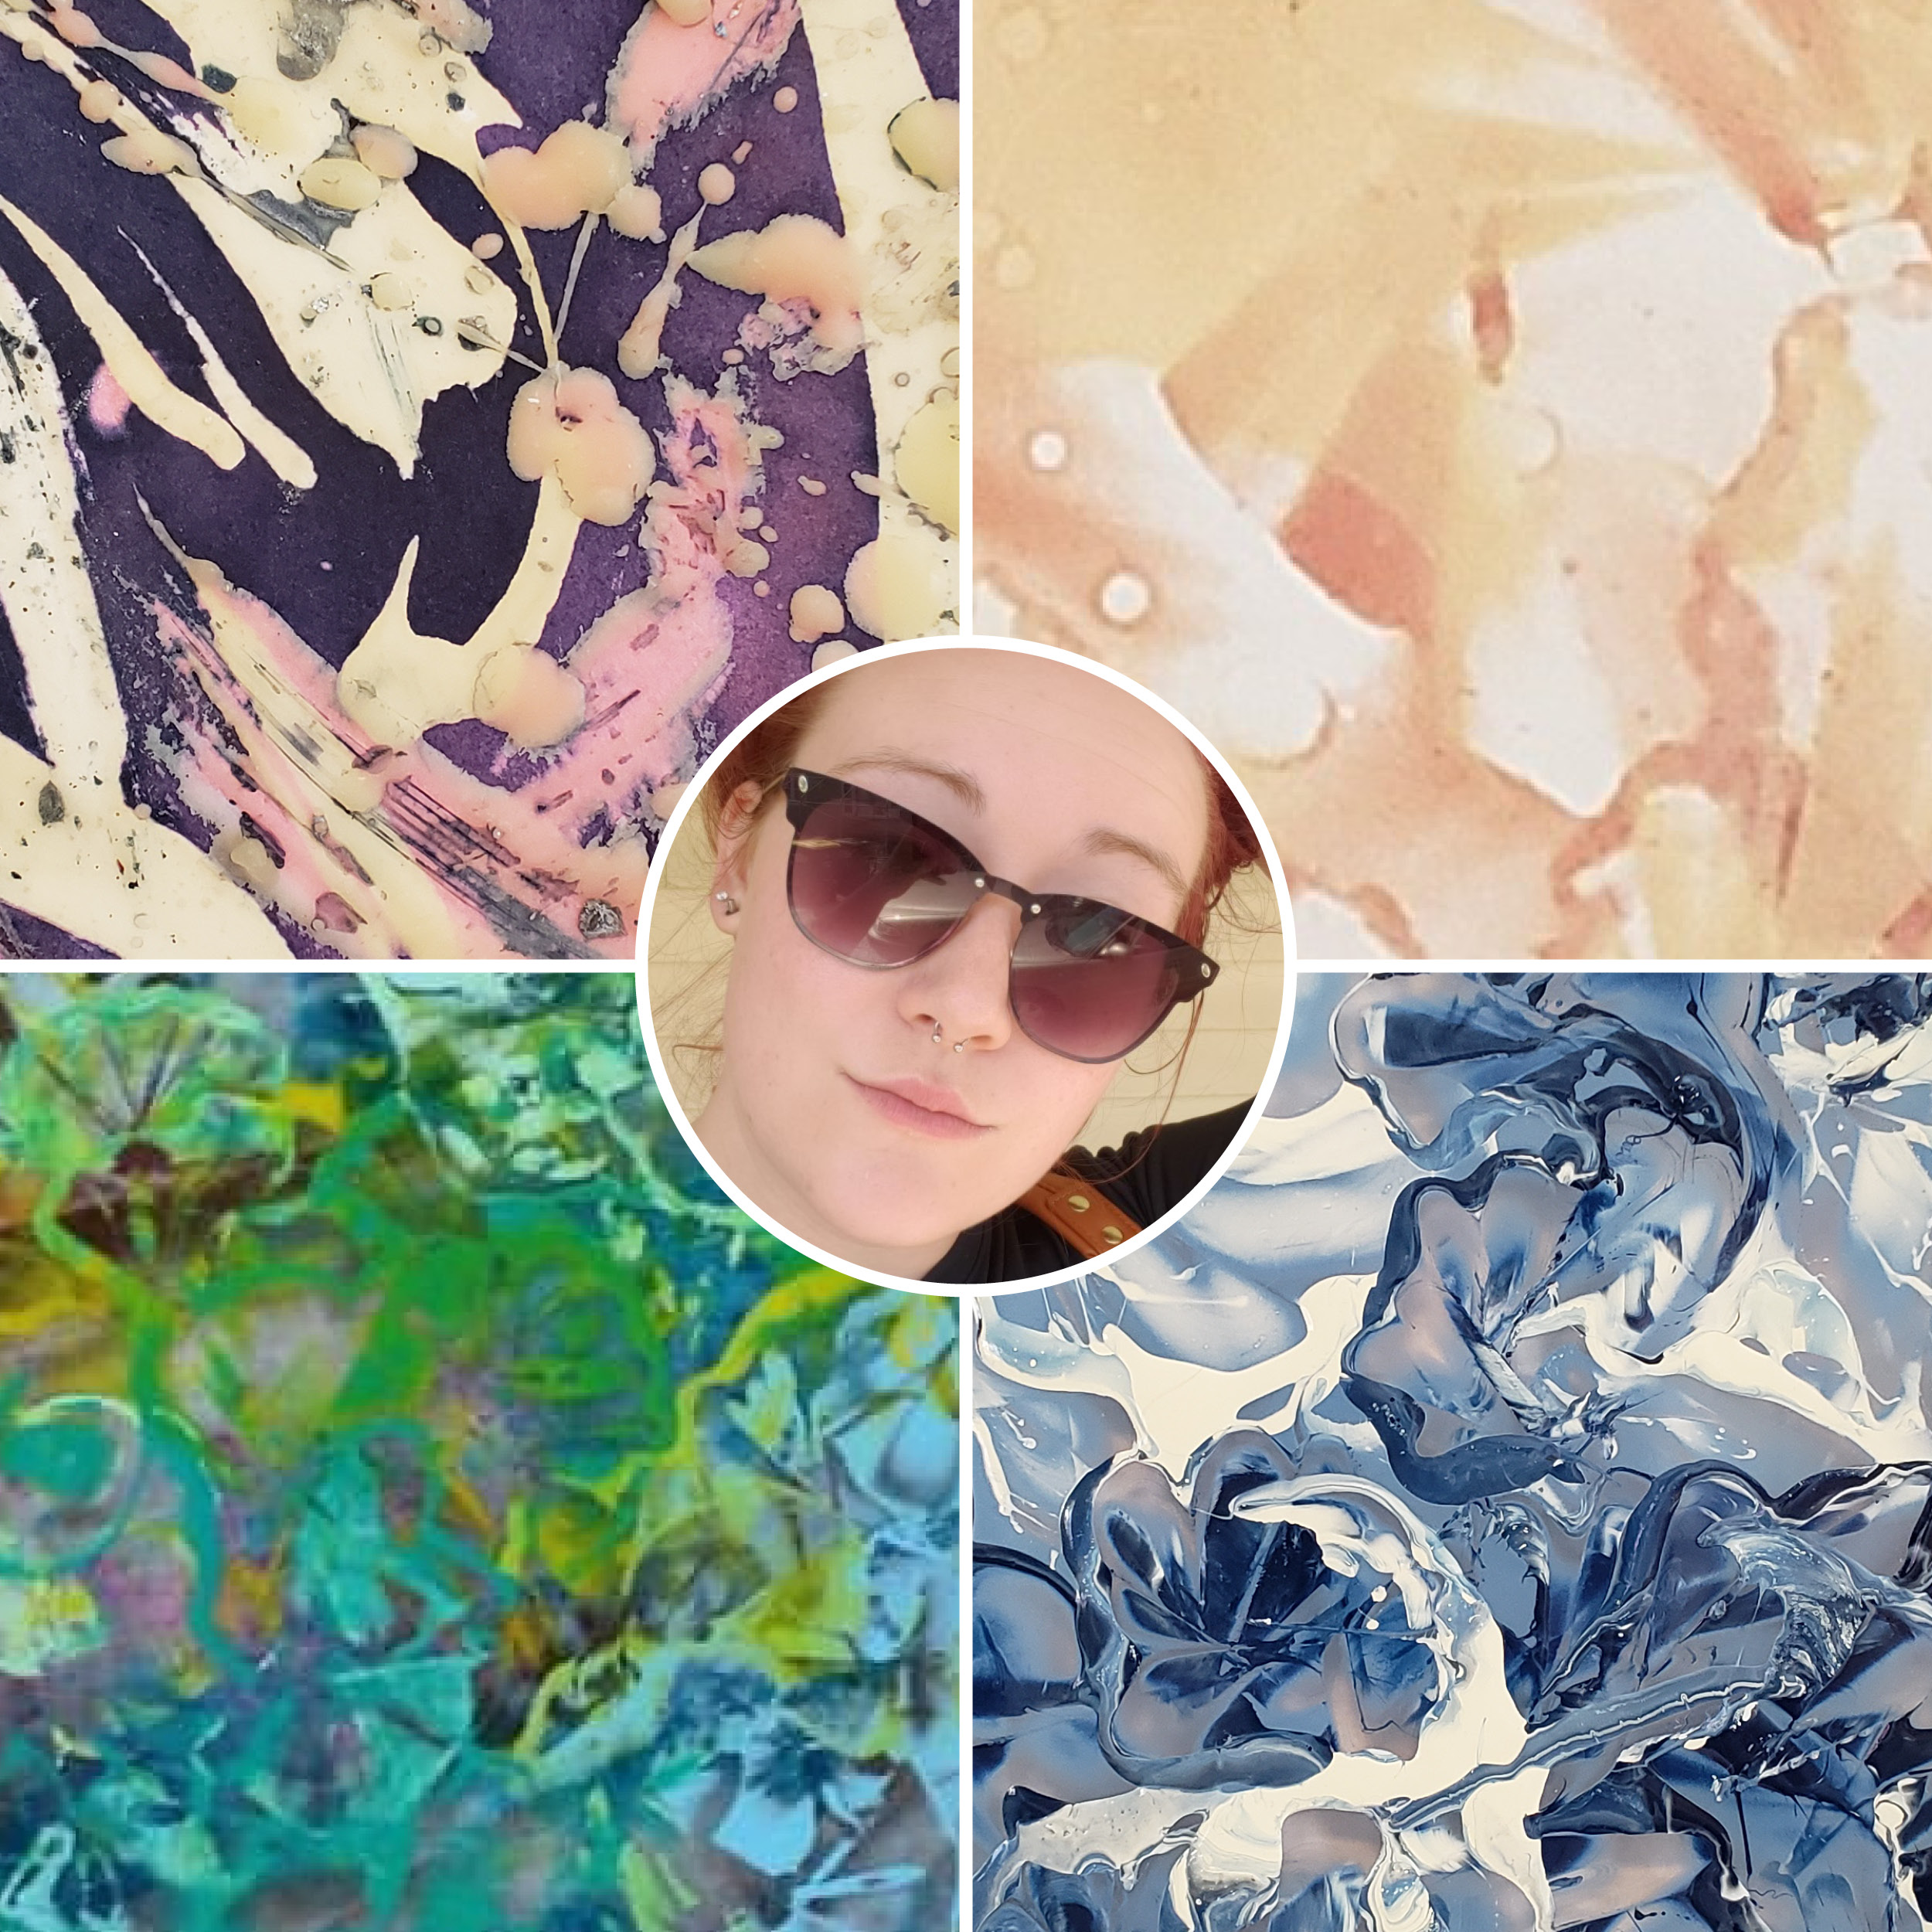 Woman with sunglasses on; abstract artwork